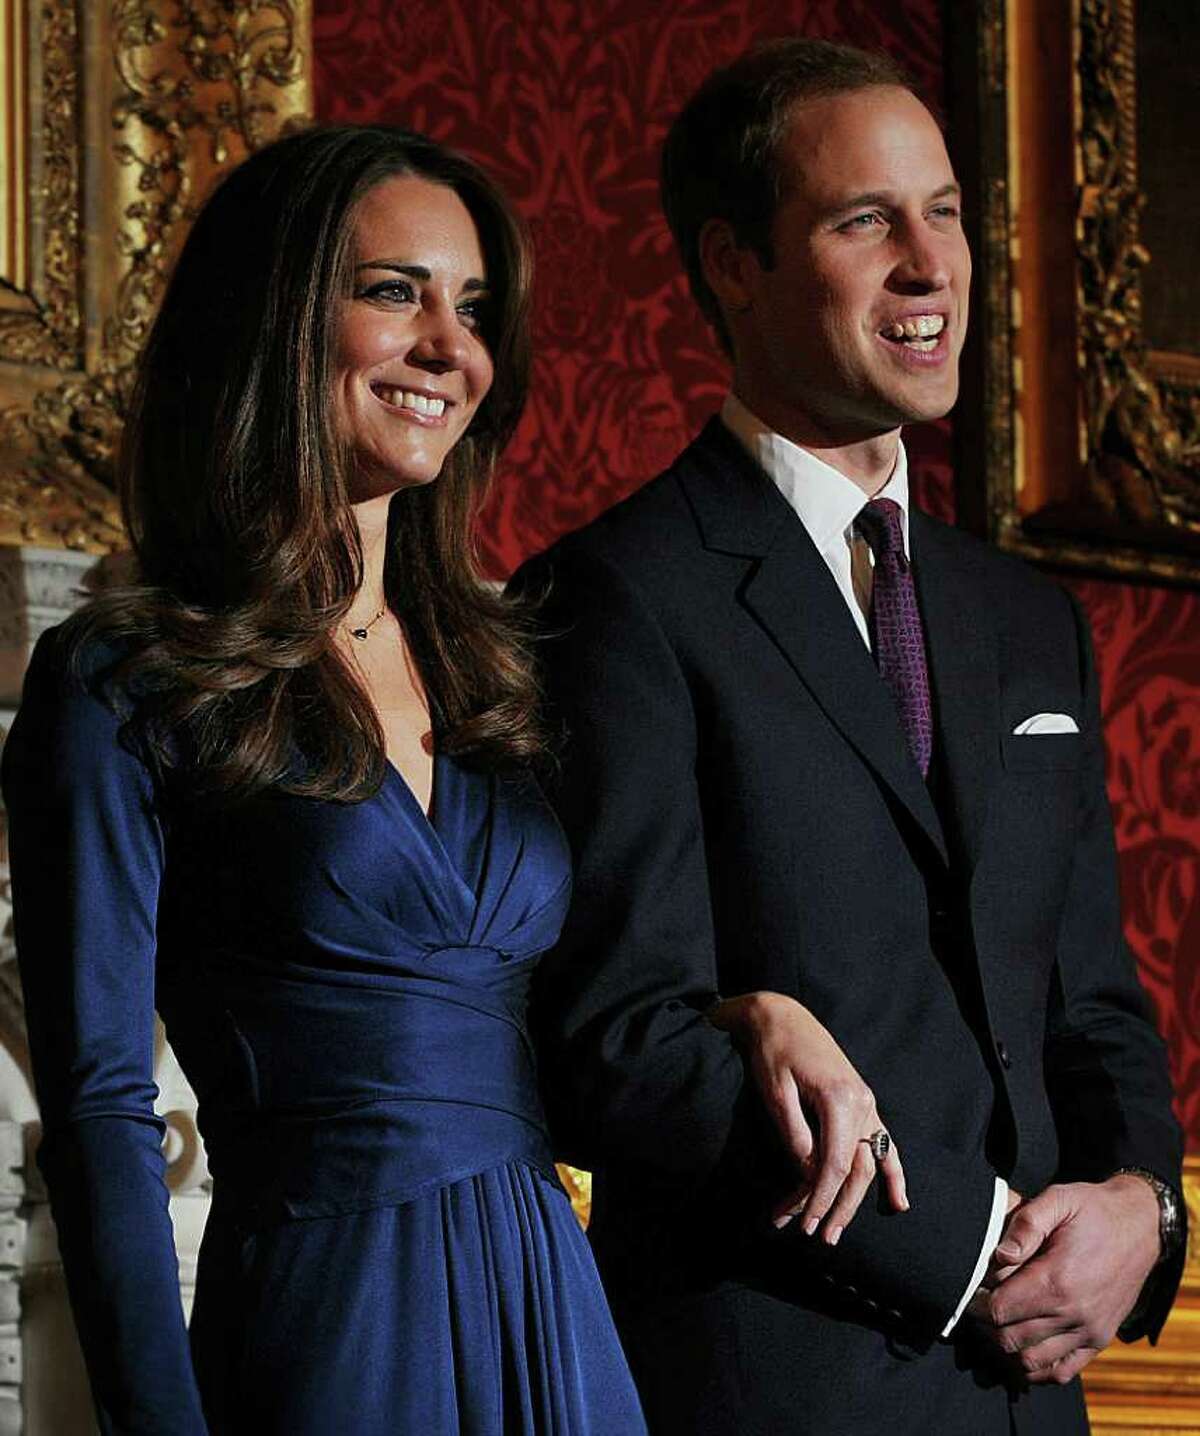 In a TheNest.com survey, 51 percent of women said they would like to spend the holidays with Prince William and Kate Middleton.